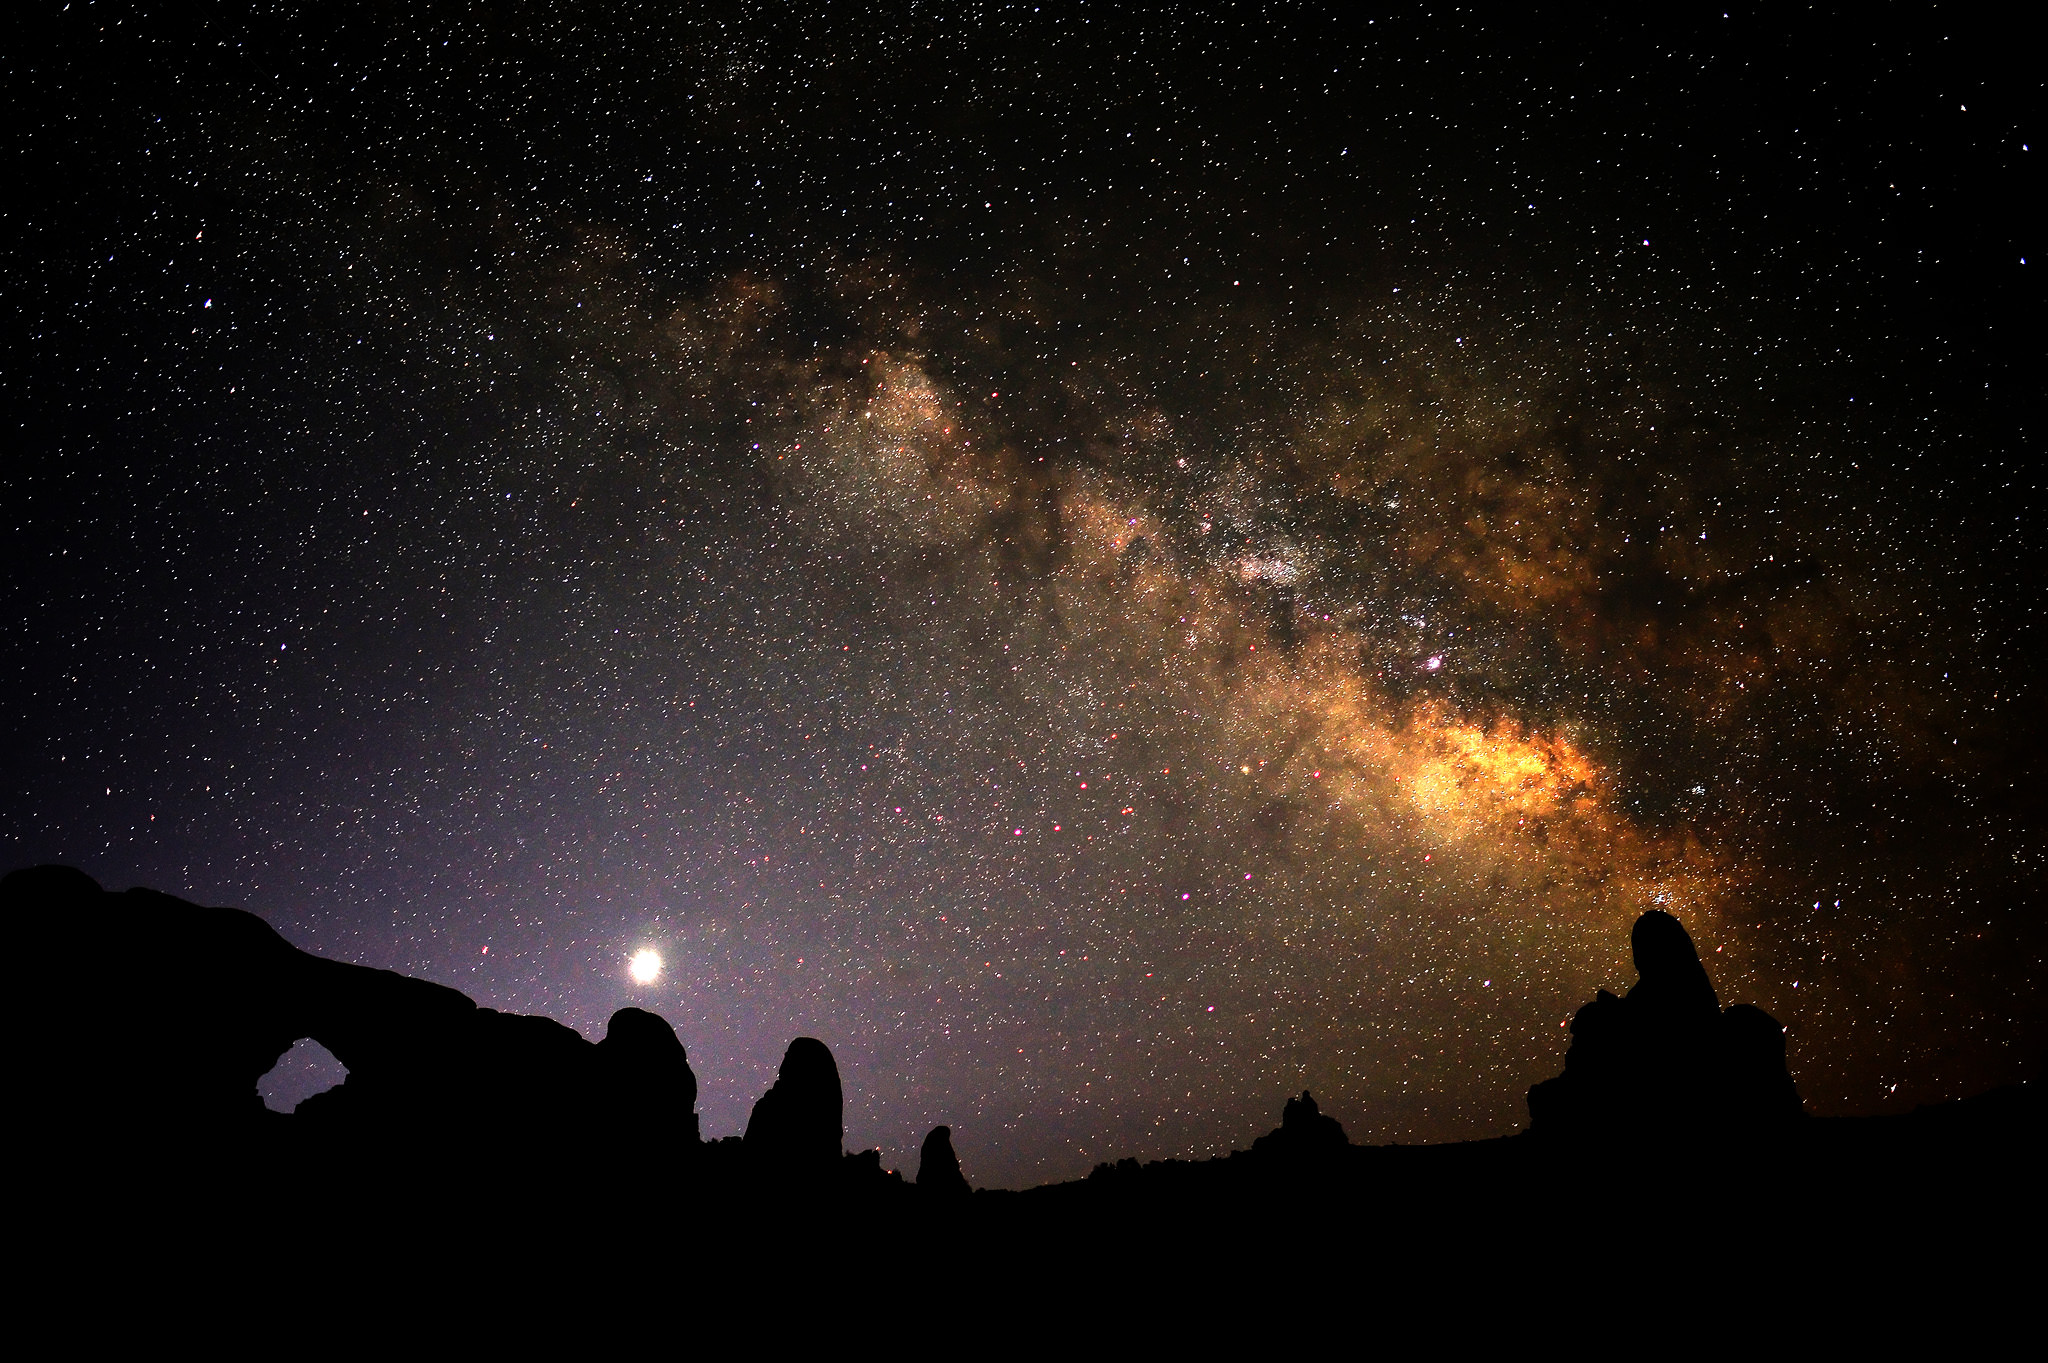 How To Photograph The Milky Way A Detailed Guide For Beginners - 